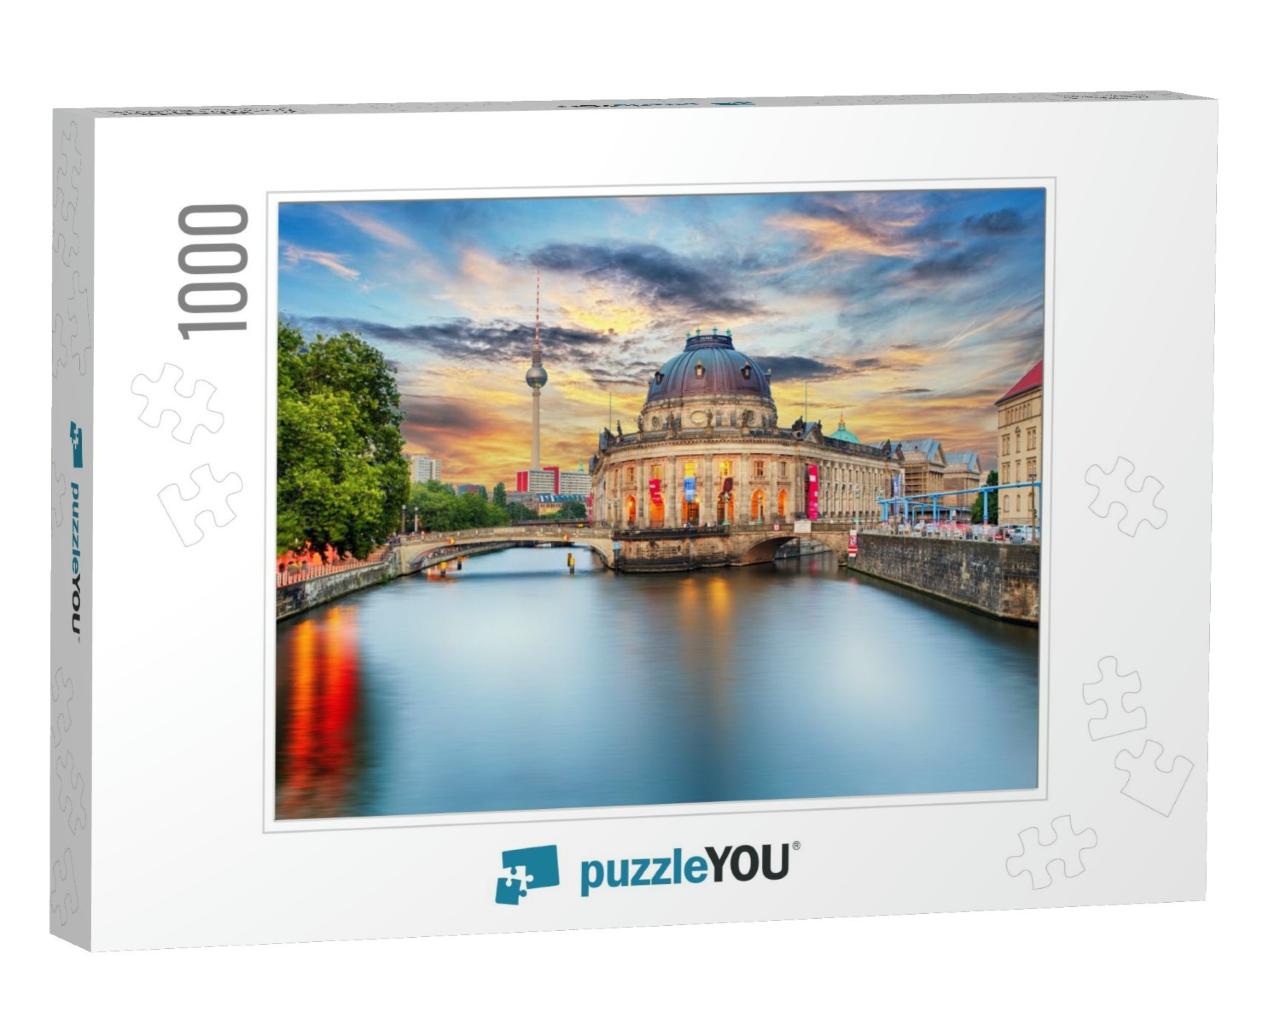 Museum Island on Spree River & Alexanderplatz Tv Tower in... Jigsaw Puzzle with 1000 pieces